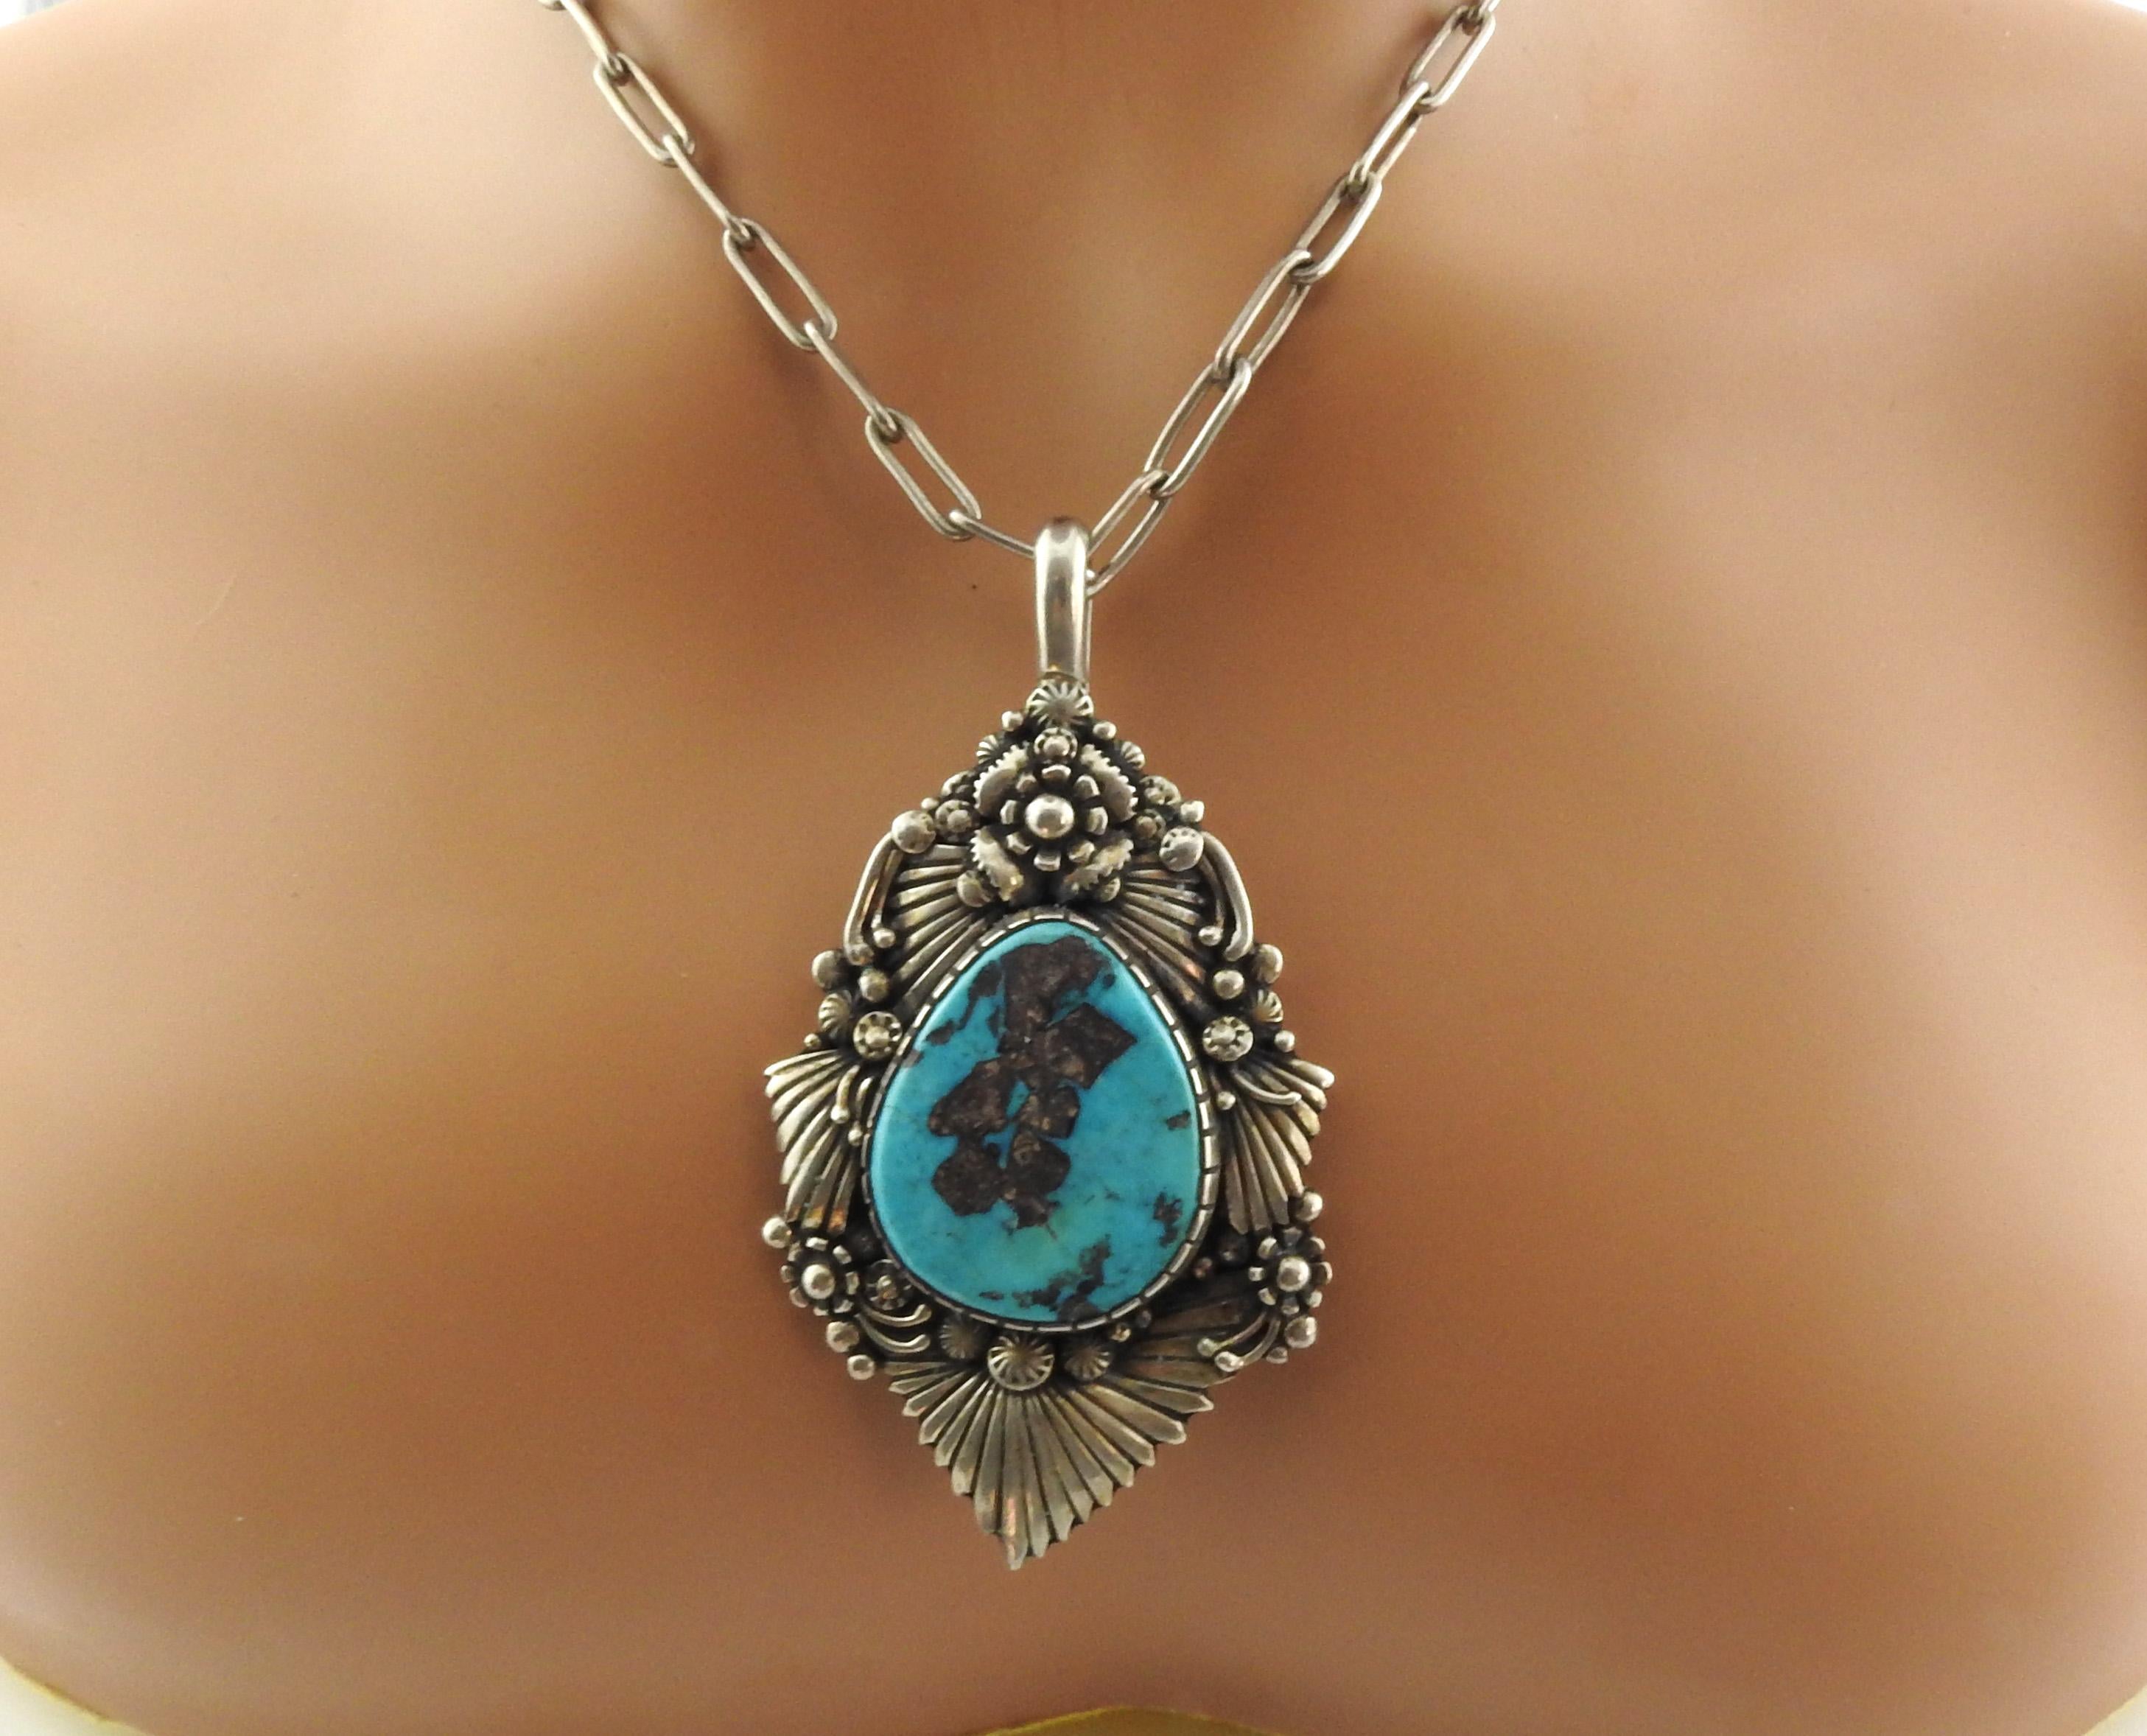 Navajo Clem Nalwood Silver and Turquoise Pendant Necklace 4